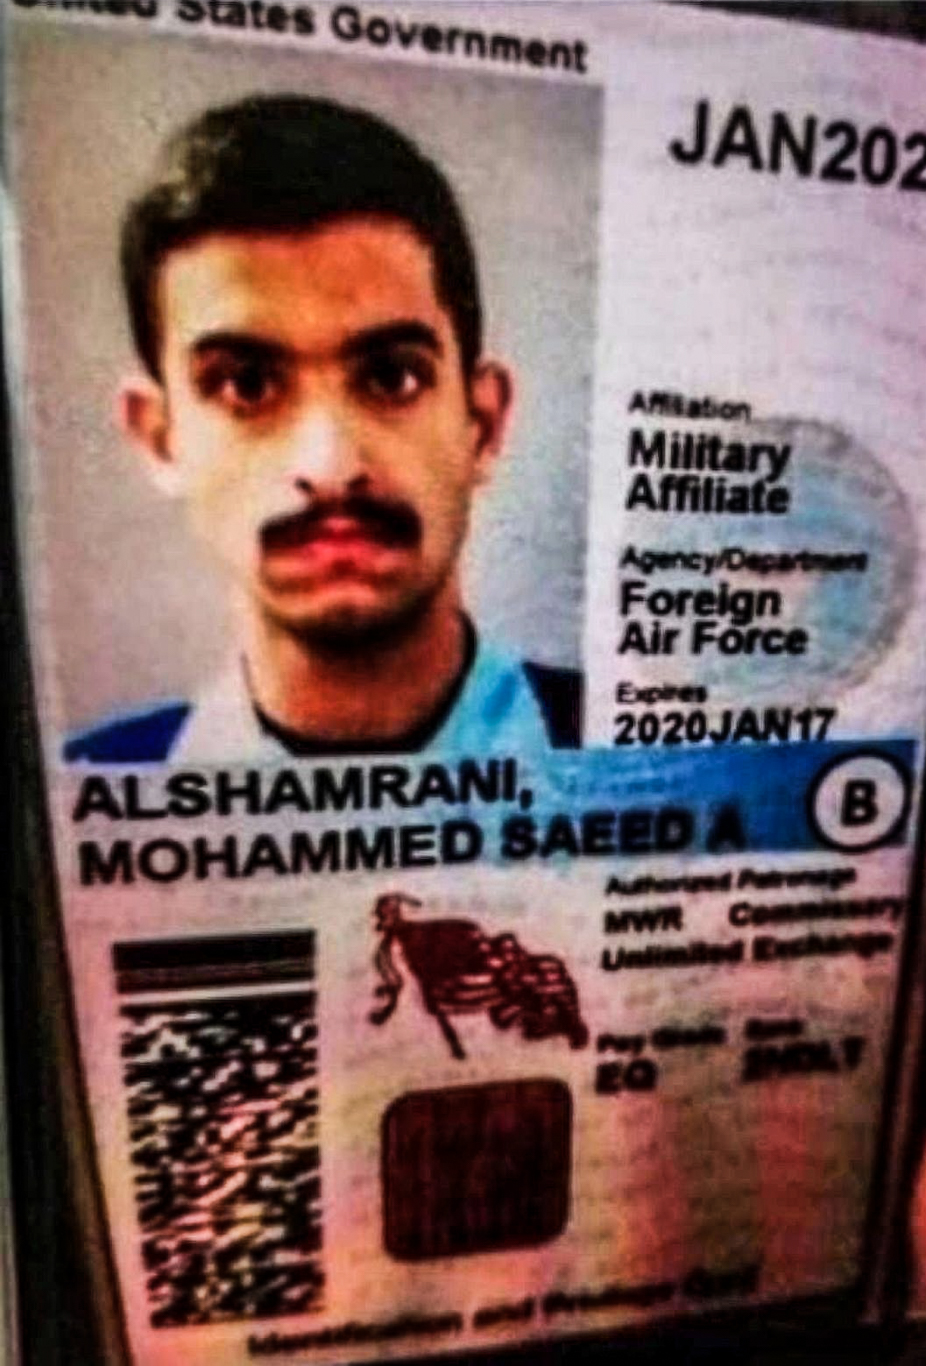 The US gov’t issues ID card of Pensacola shooter Mohammed Alshamrani